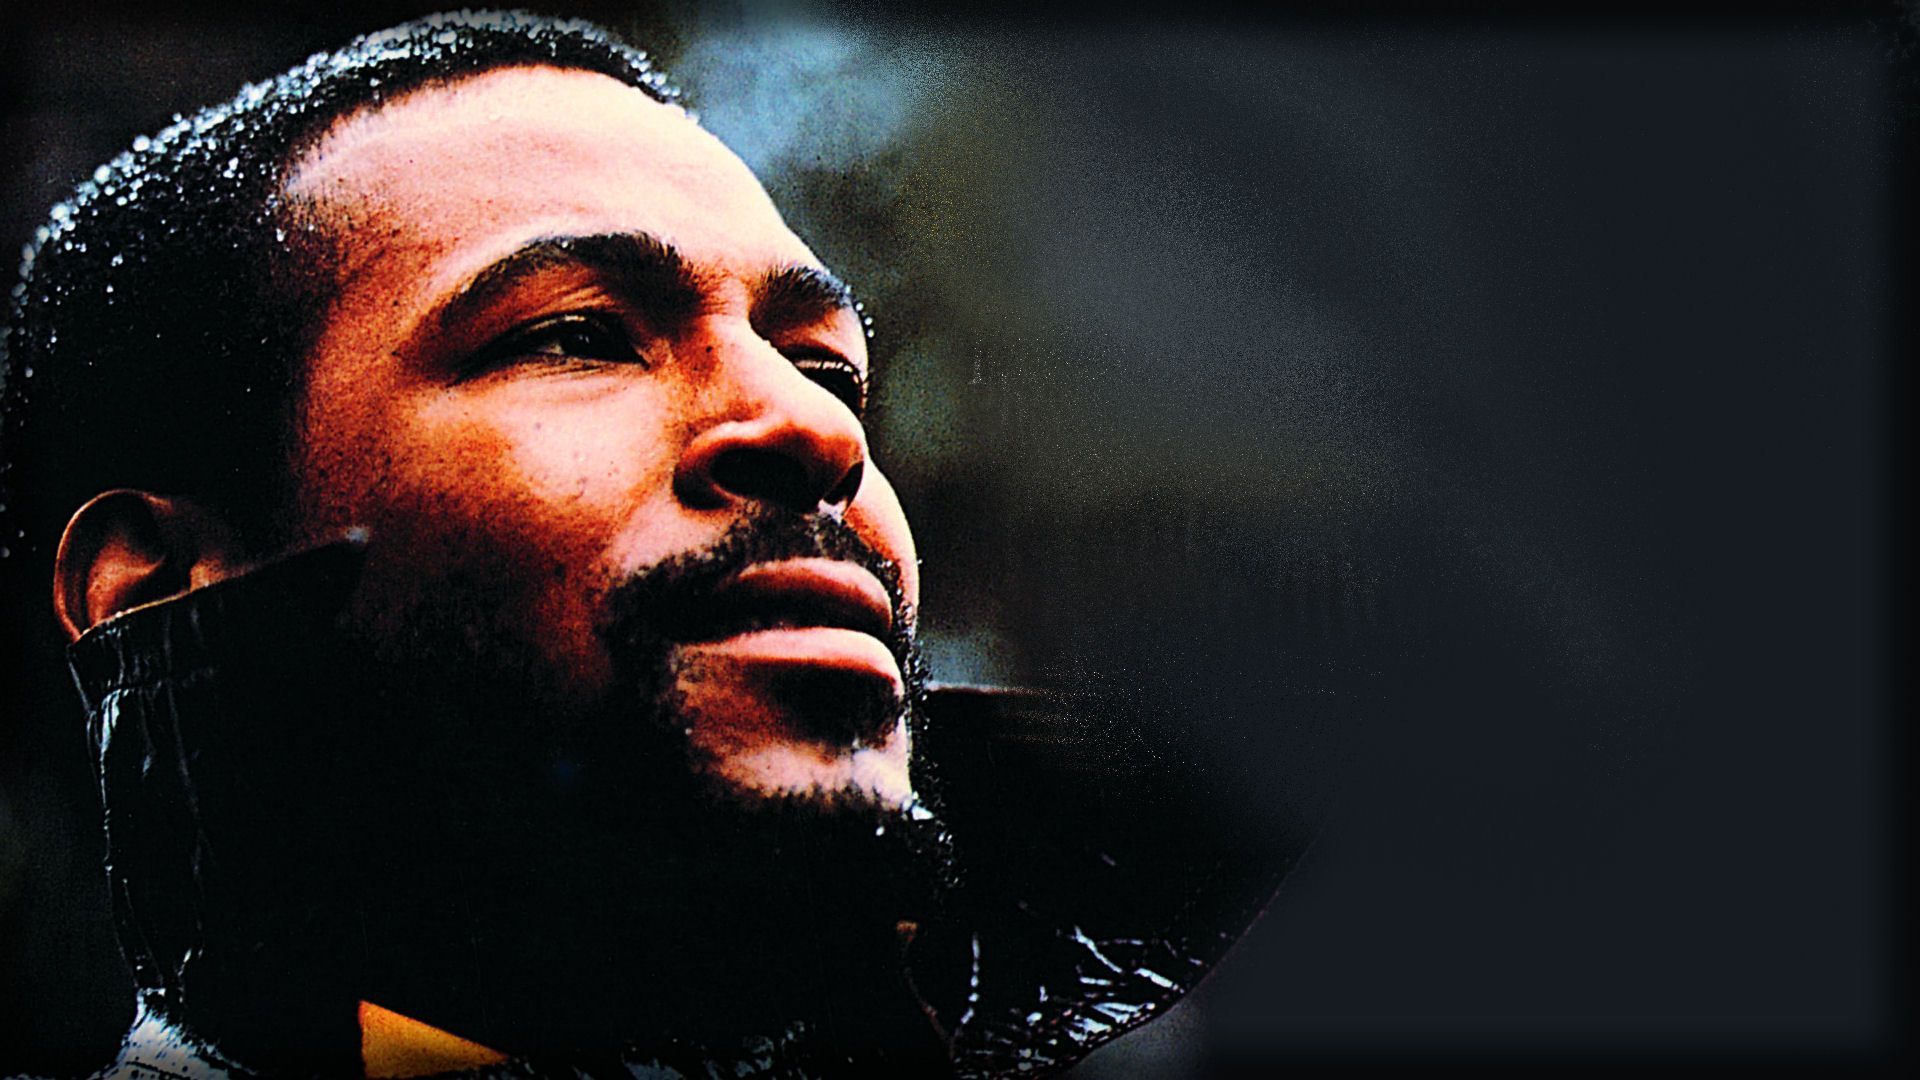 3 Marvin Gaye HD Wallpapers | Backgrounds - Wallpaper Abyss